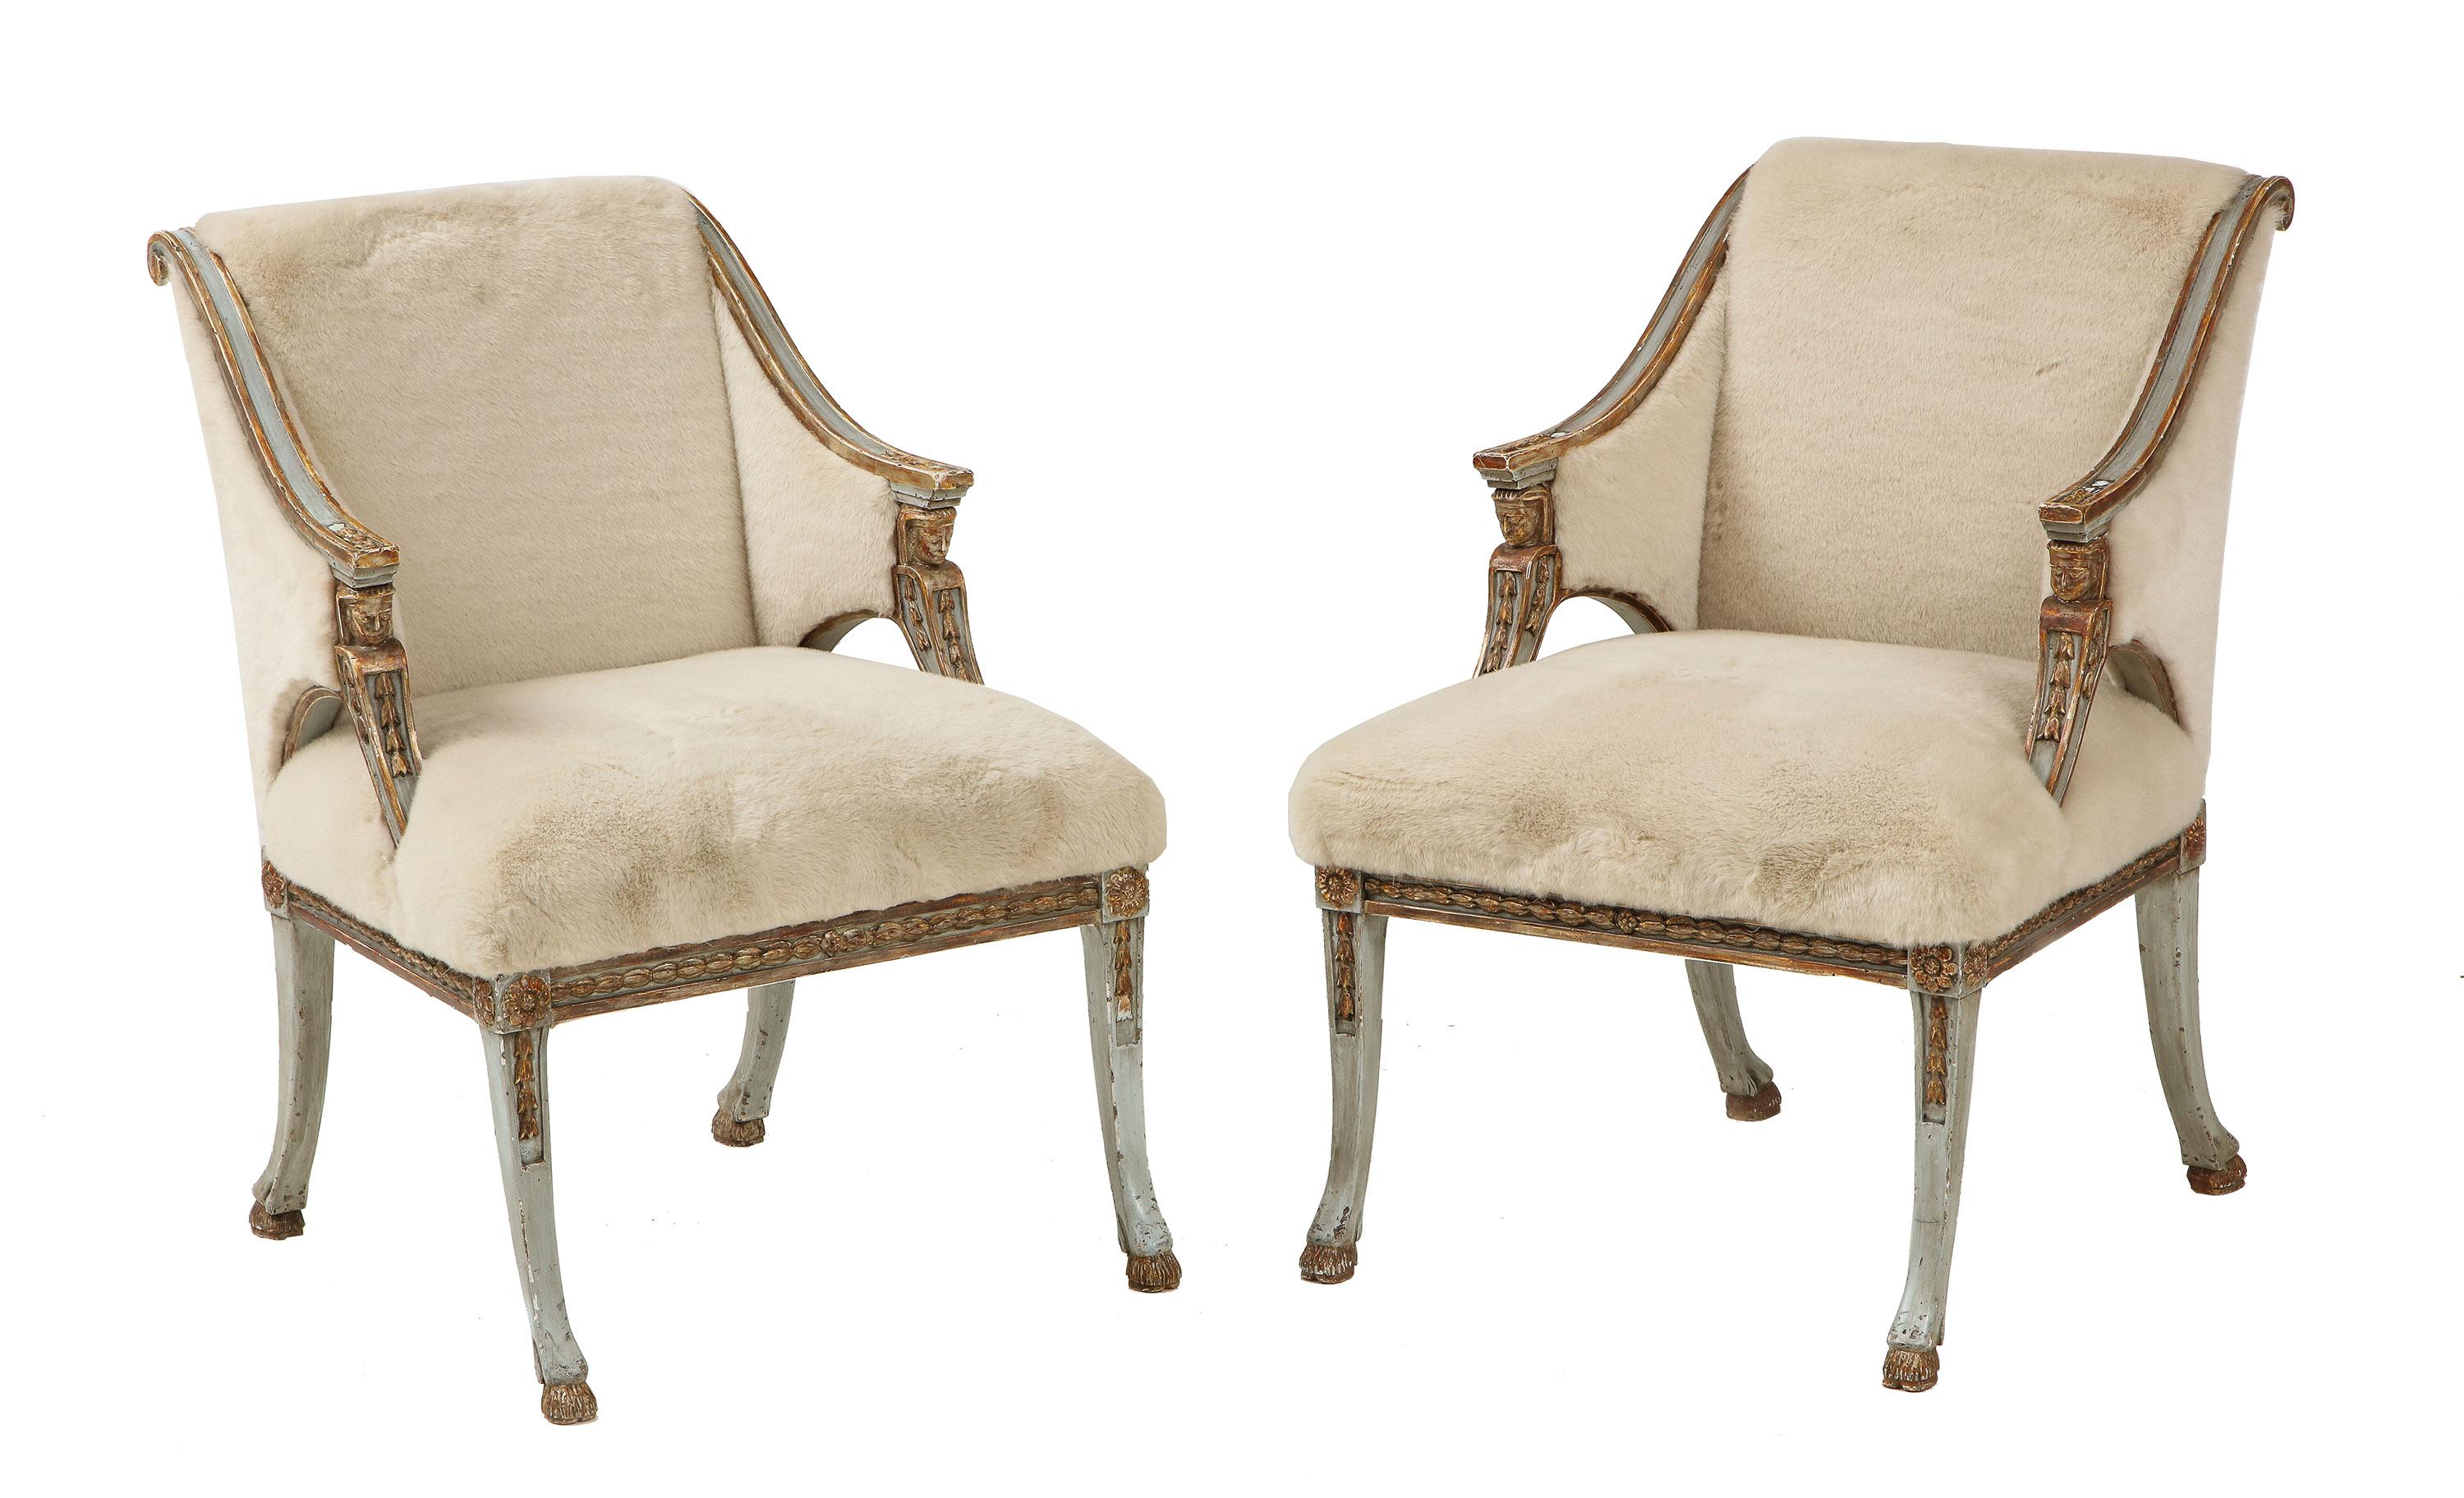 Each with a square upholstered back carved with back scrolled ears flanked by arms carved with bellflowers supported by classical figure heads centering an attached seat, the rails similarly carved all on sabre legs ending in hoof feet.